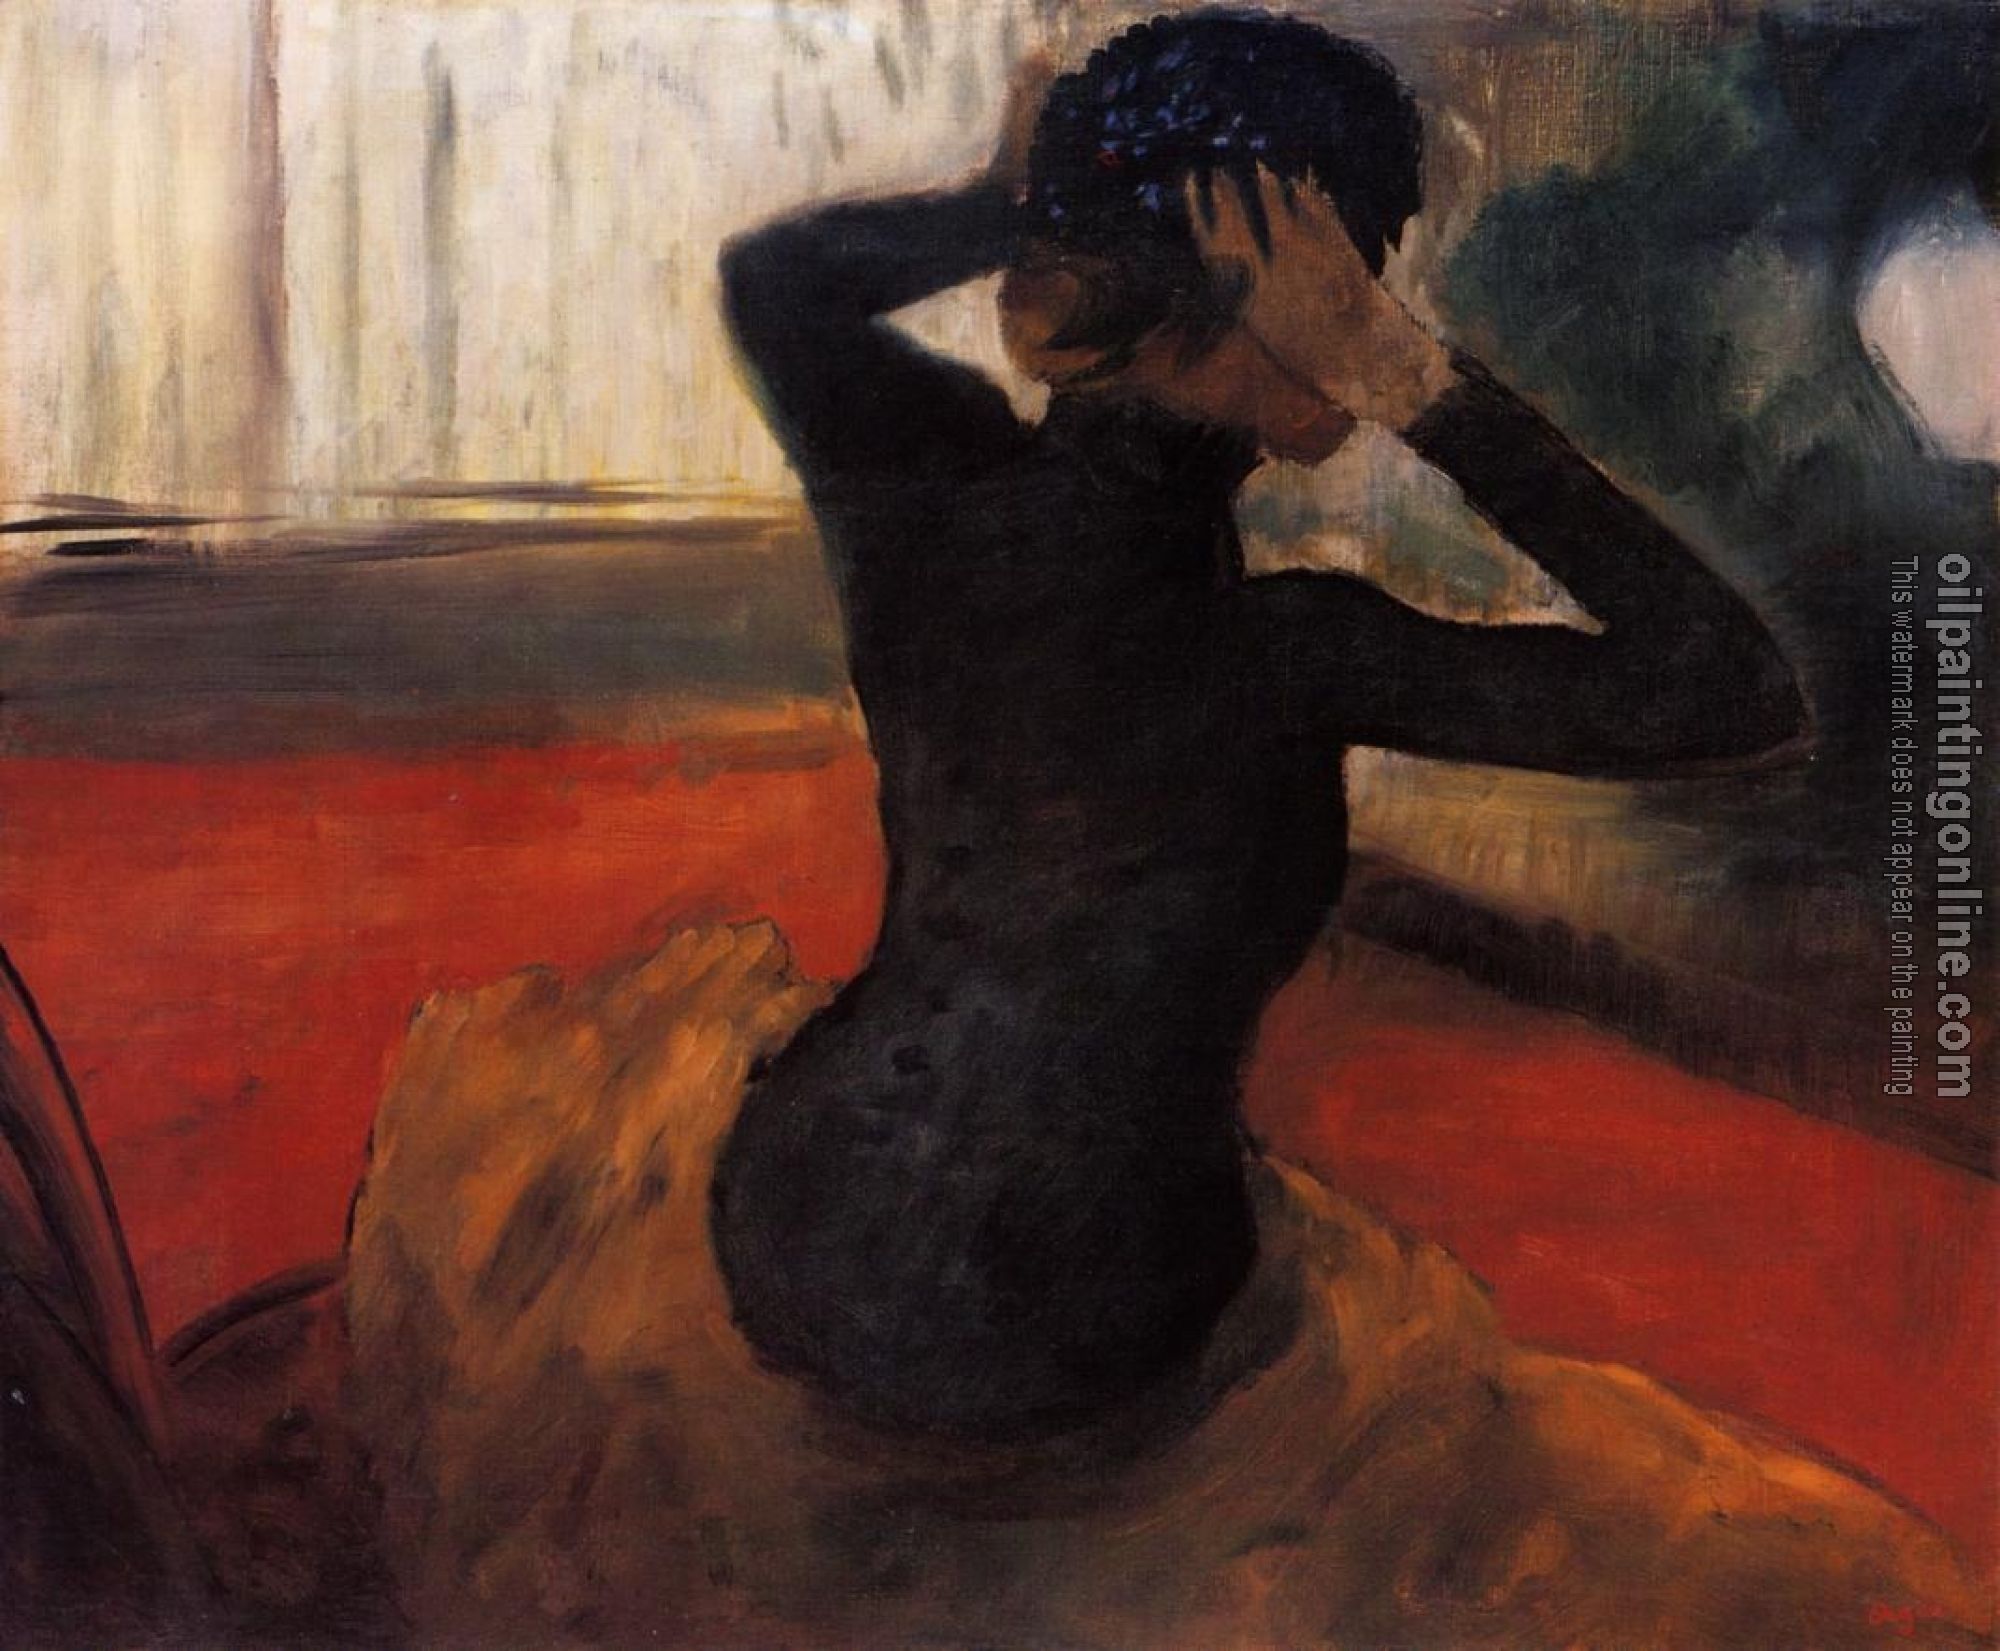 Degas, Edgar - Woman Trying on a Hat